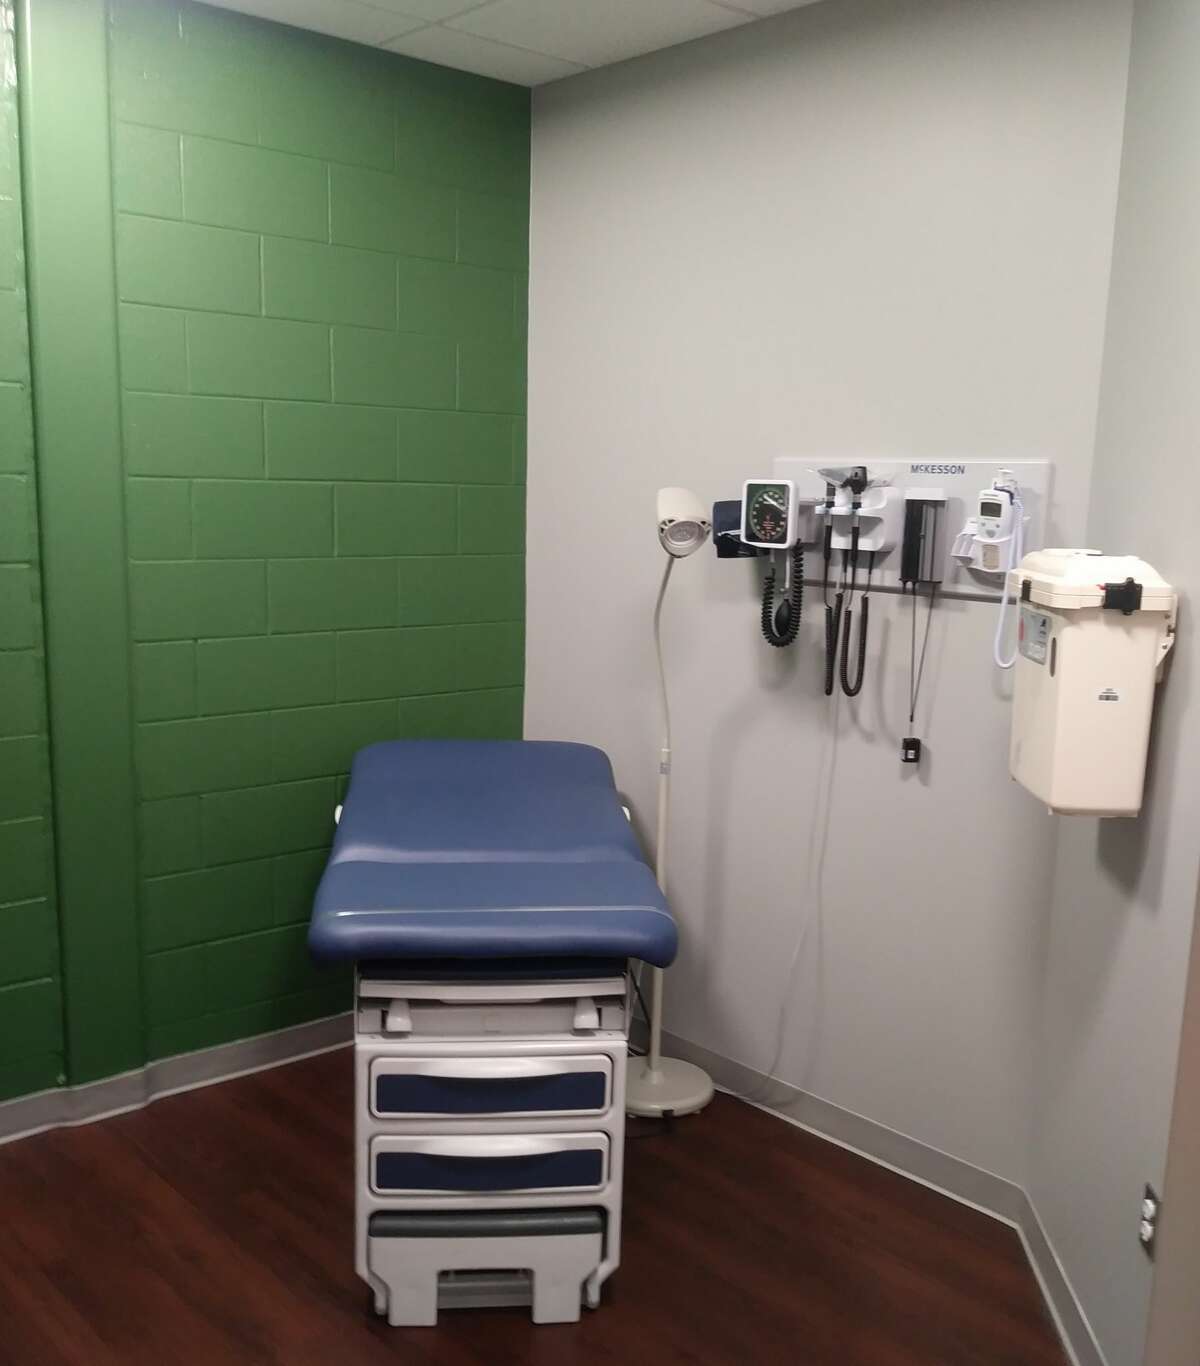 Pictured is an examination room within the Child and Adolescent Health Center at Manistee Middle High School.